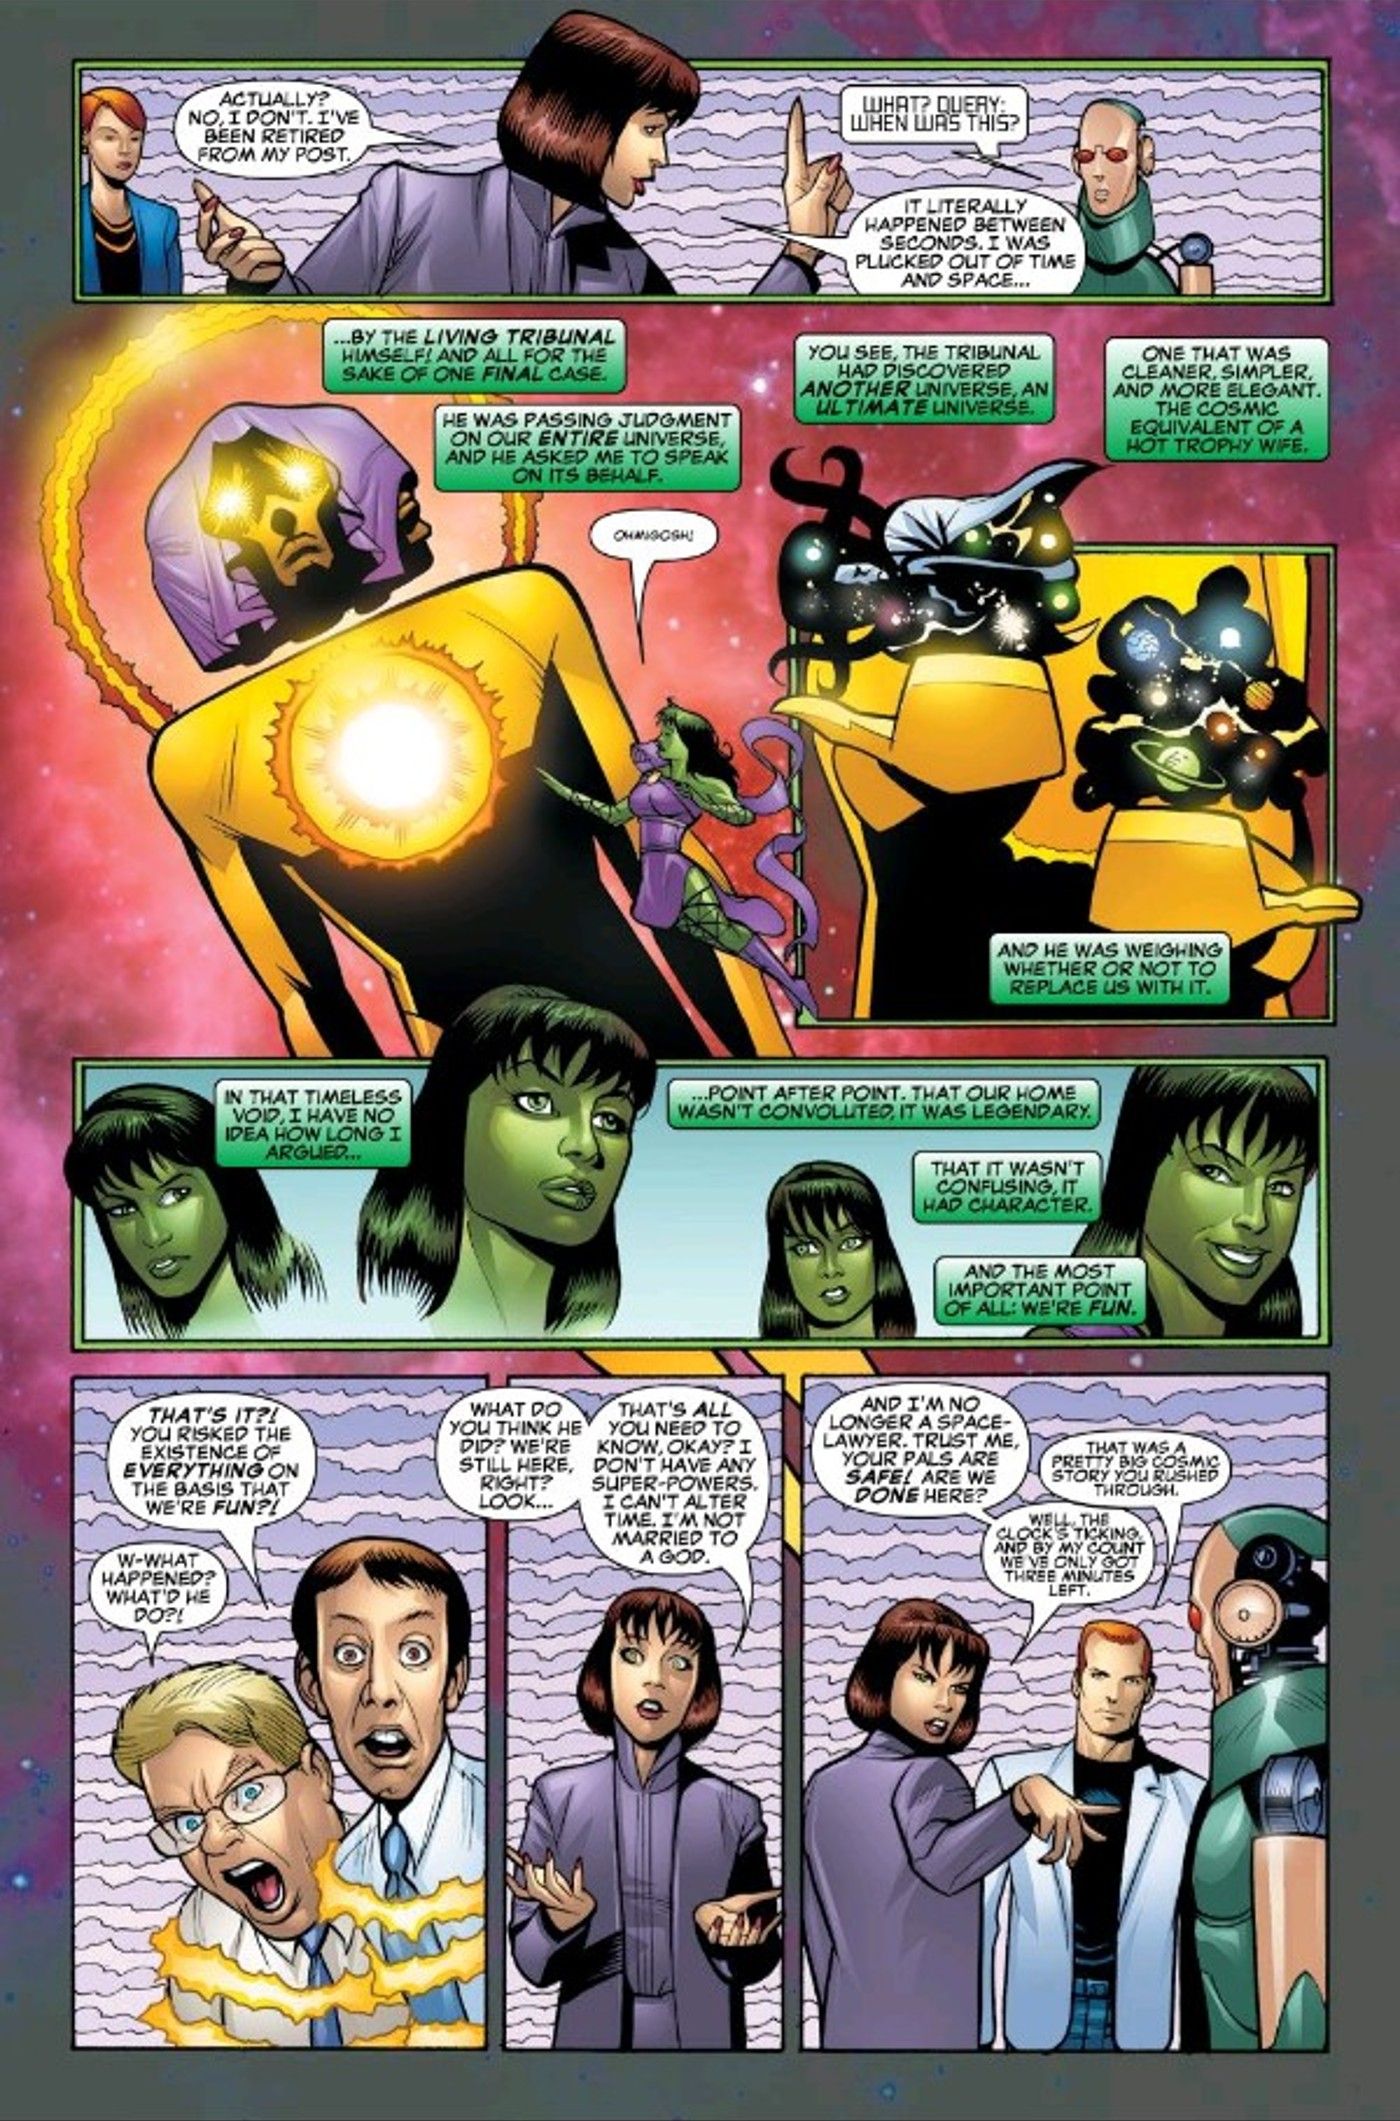 She-Hulk talks to The Living Tribunal about the Ultimate Marvel Universe